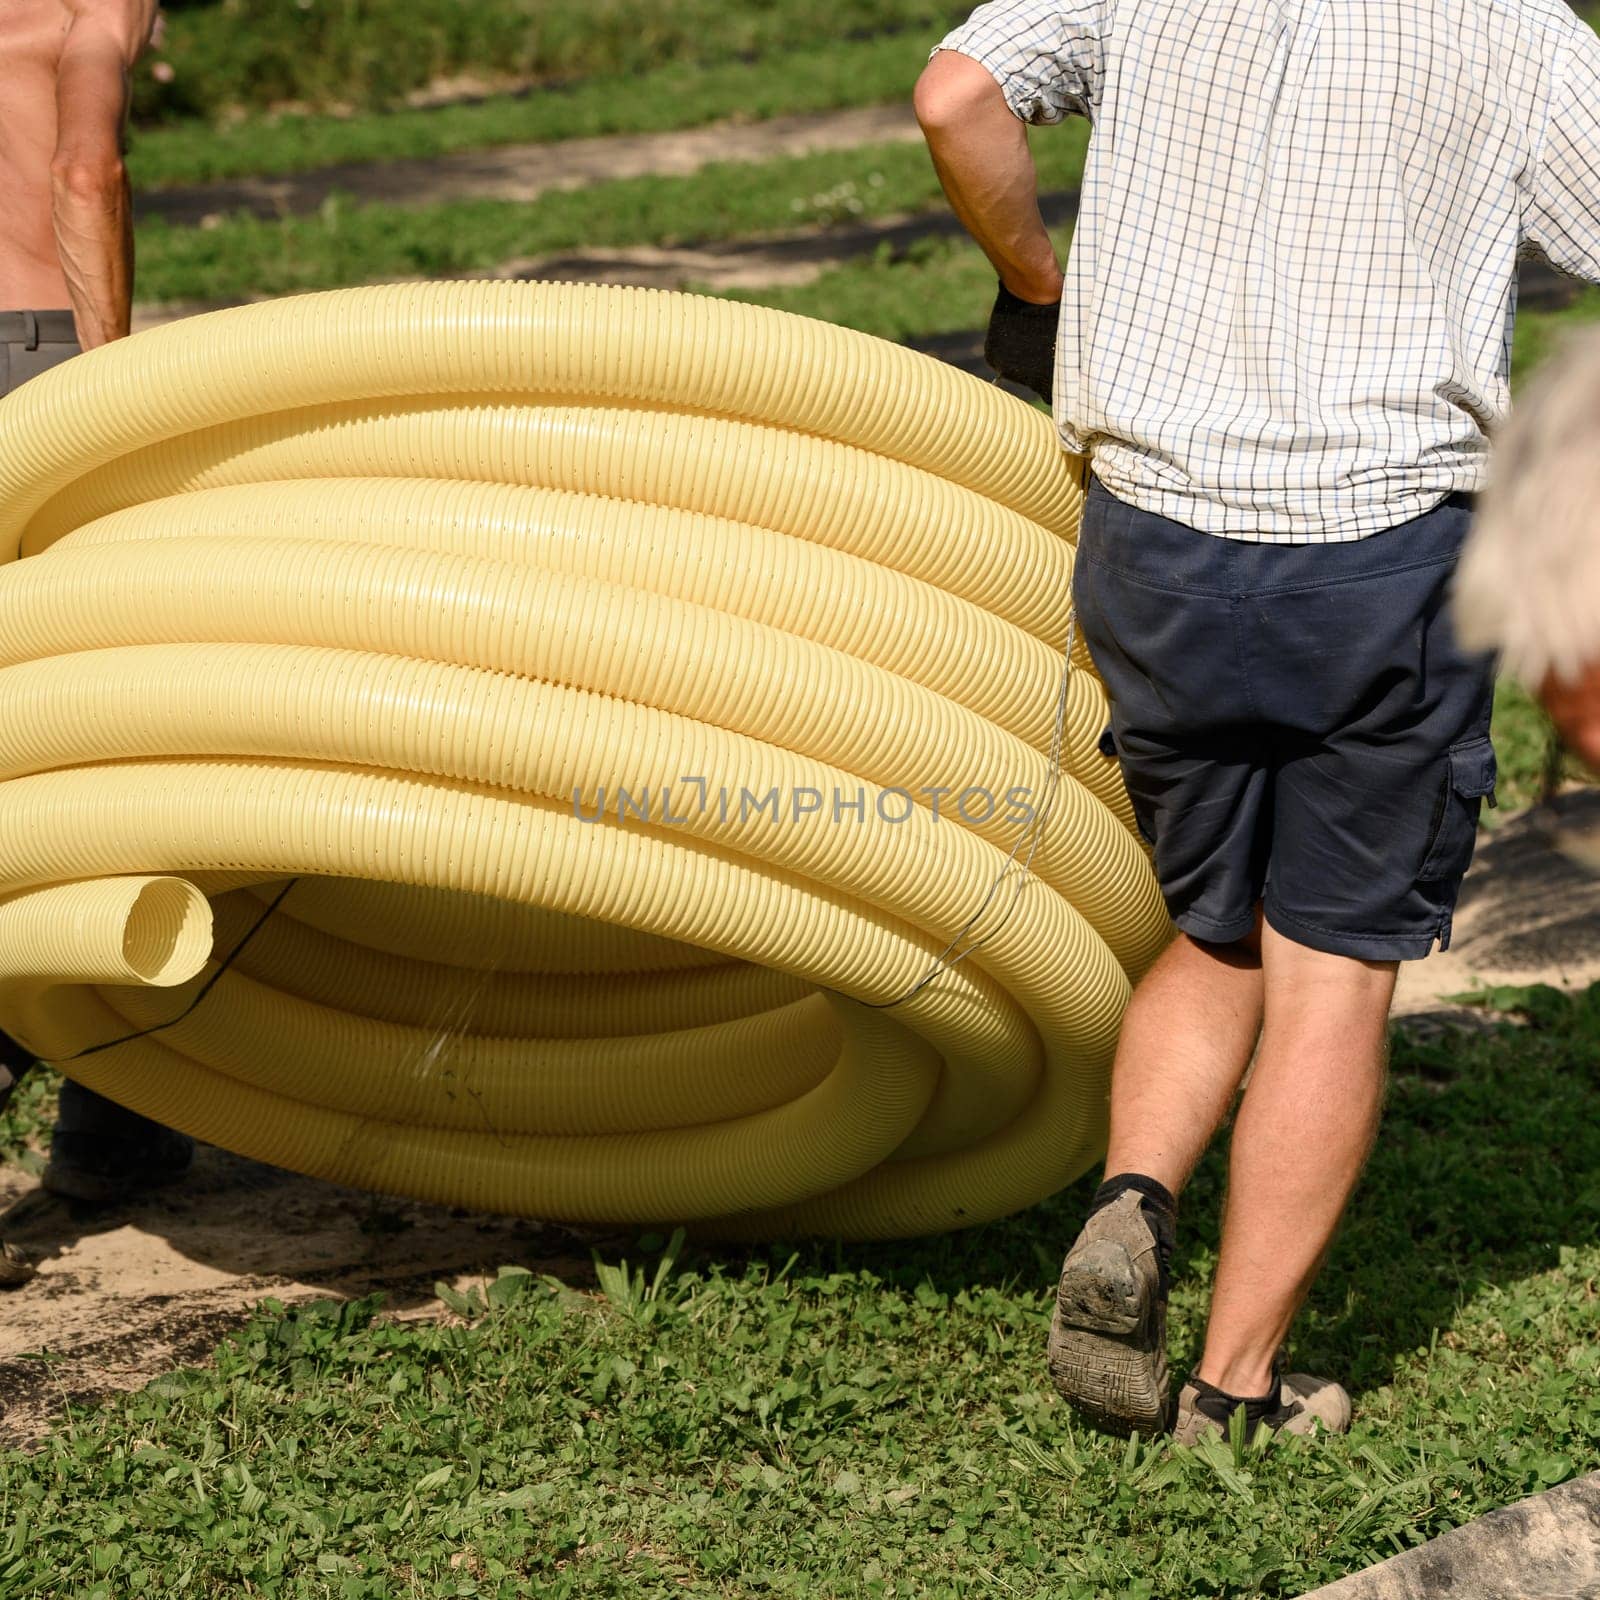 Workers carry a roll of yellow drainage pipe in their hands. Preparation for drainage works and removal of groundwater.